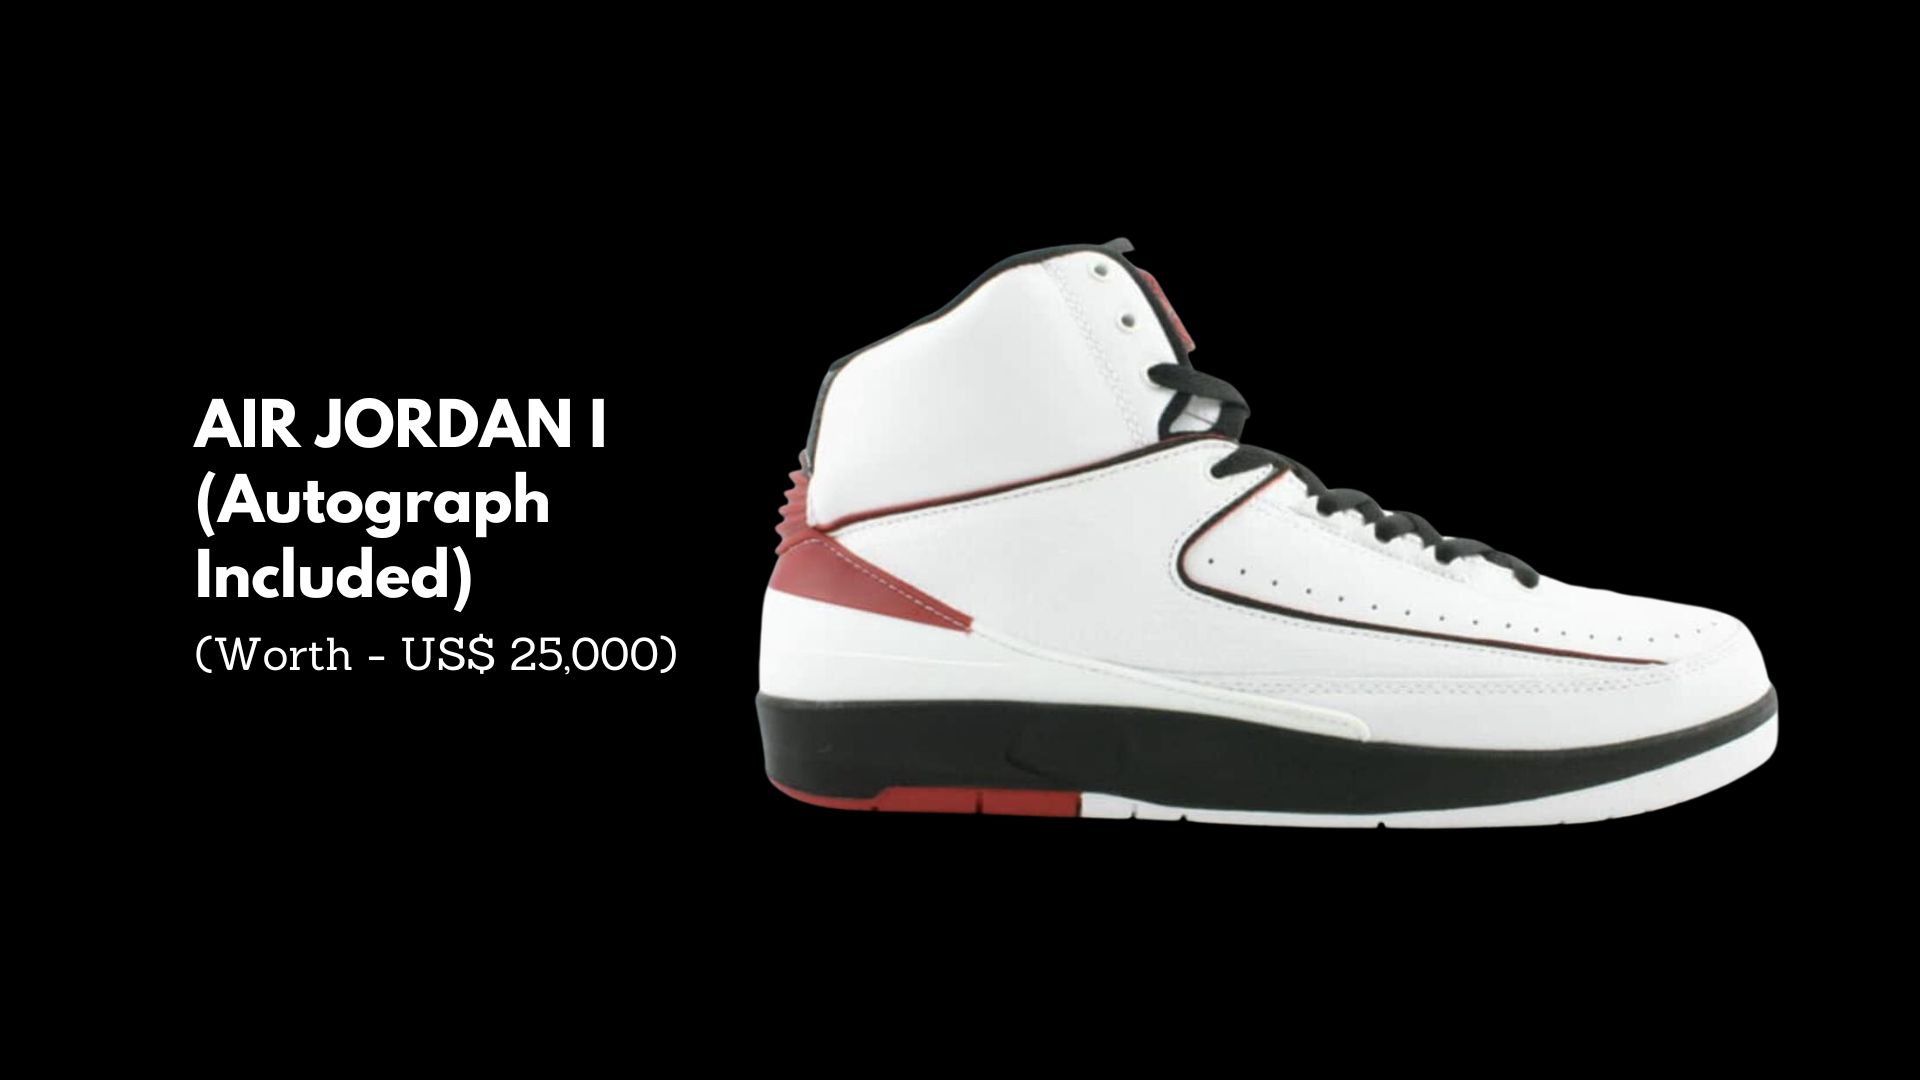 Air Jordan I (autograph included) (Worth - US$25,000) - Top 10 Most Expensive Air Jordans In The World